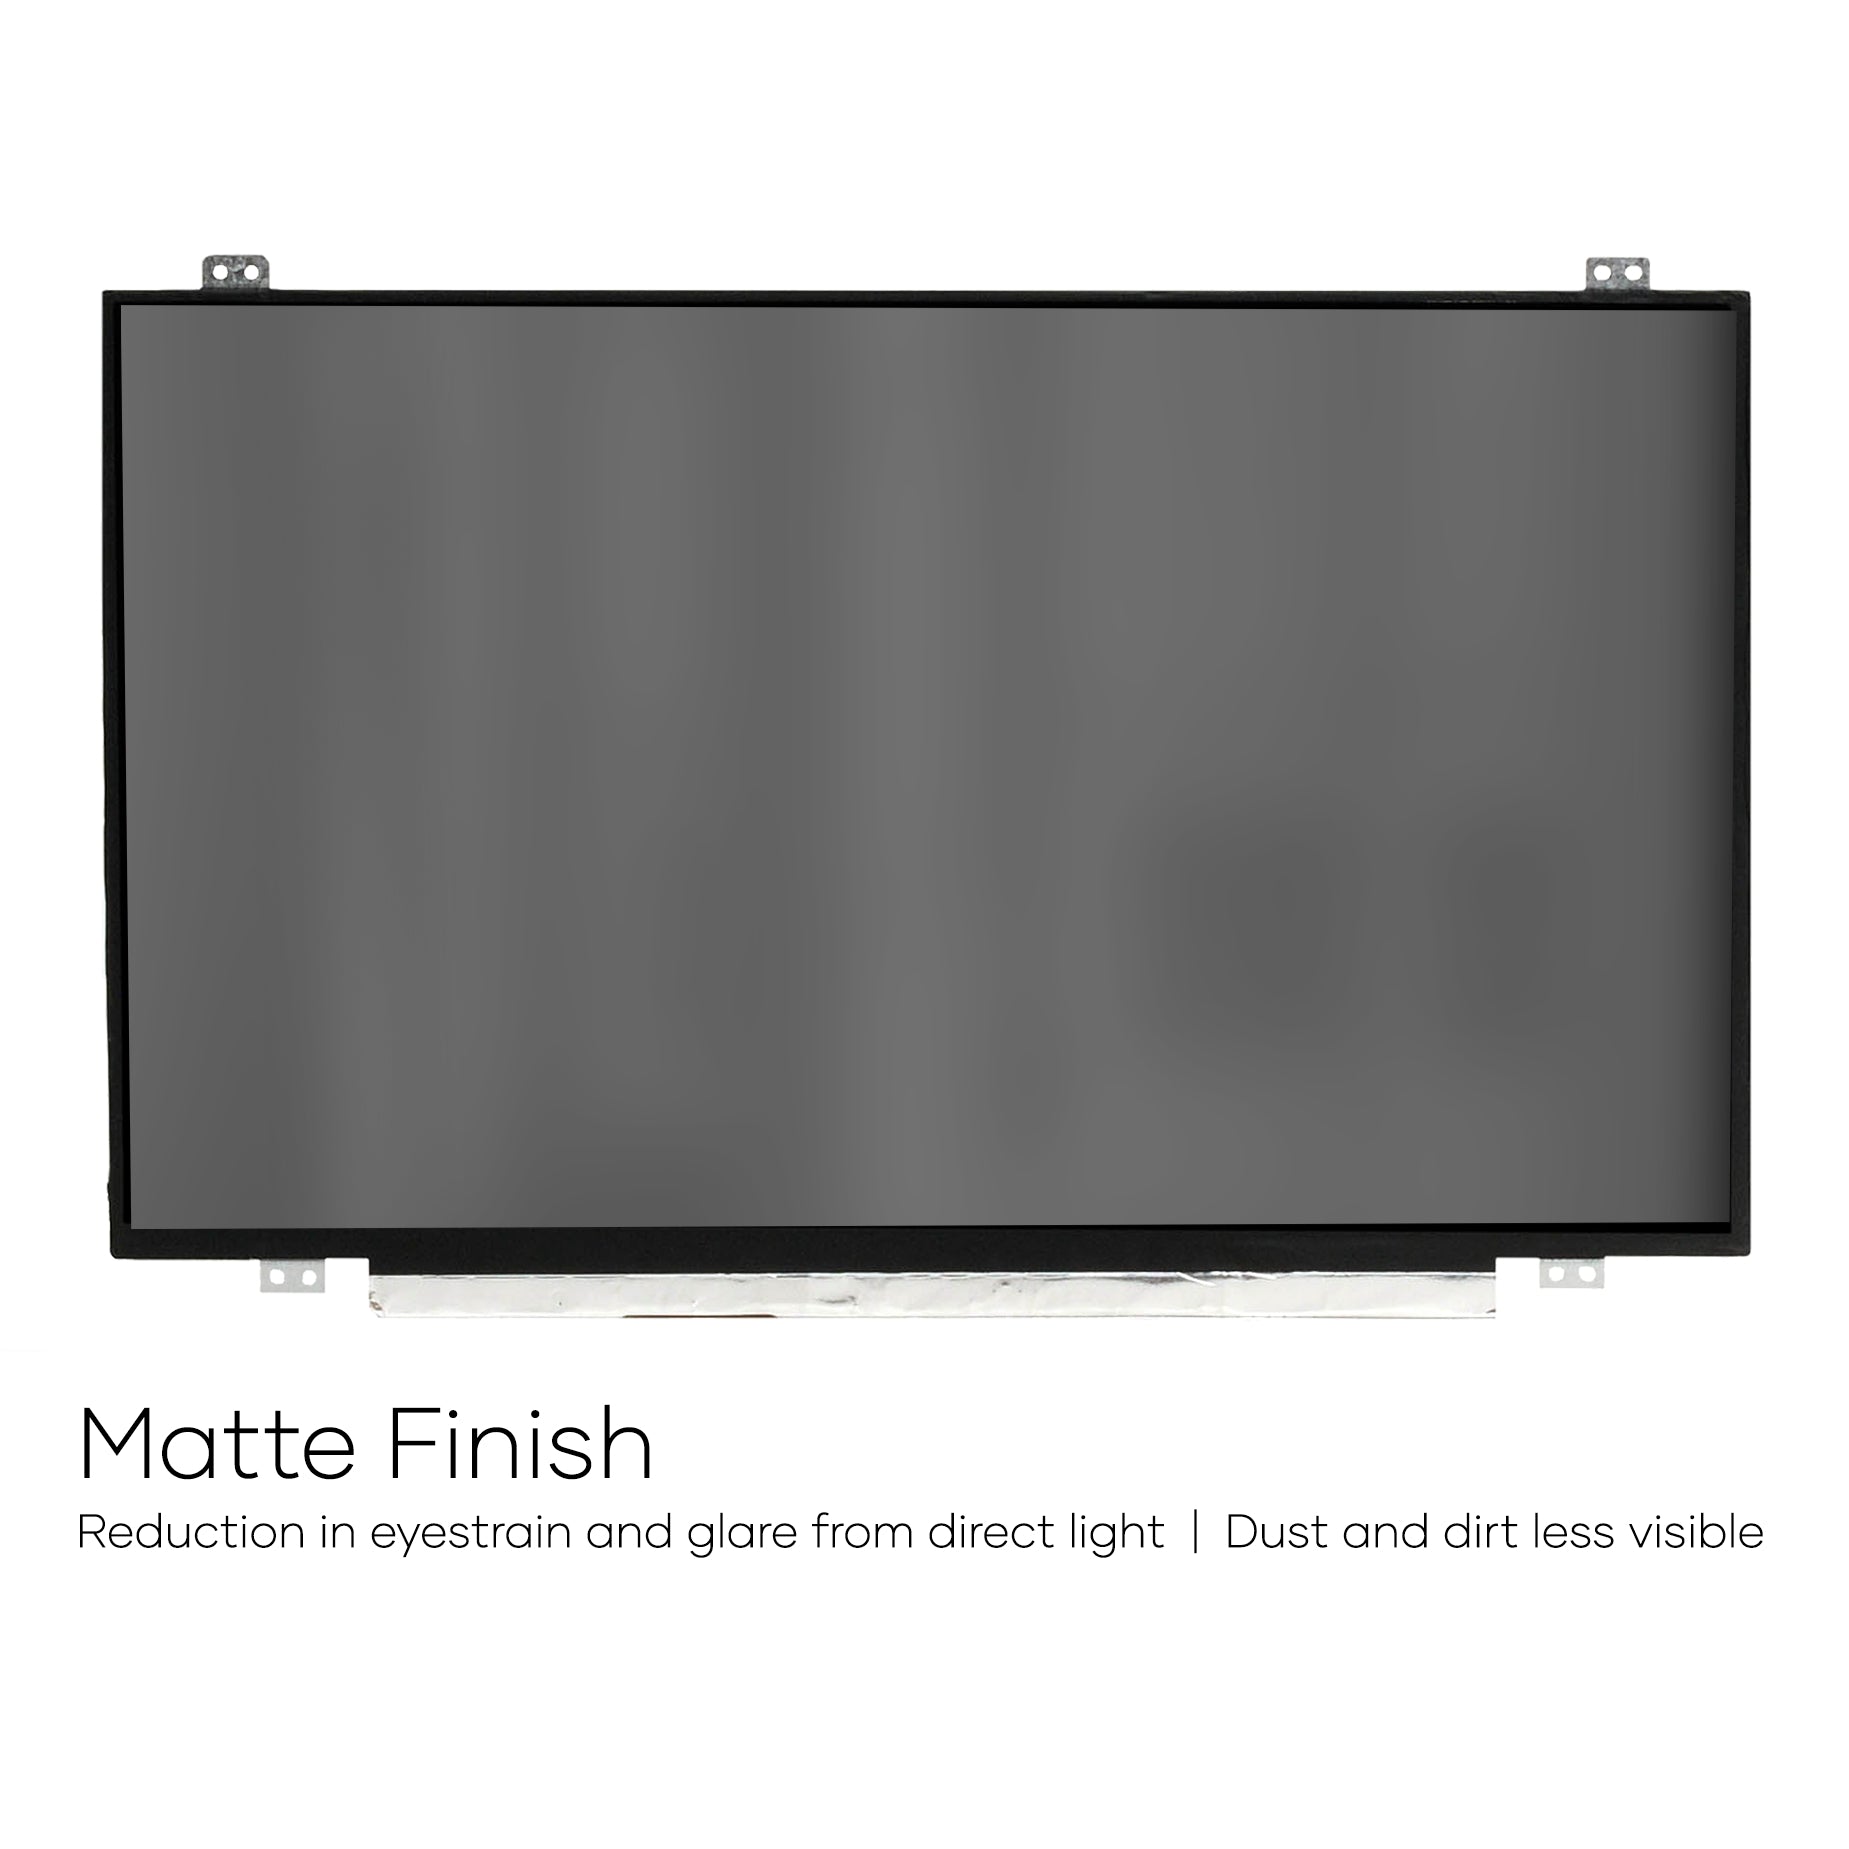 Screen Replacement for LP140WF6(SP)(B4) FHD 1920x1080 IPS Matte LCD LED Display